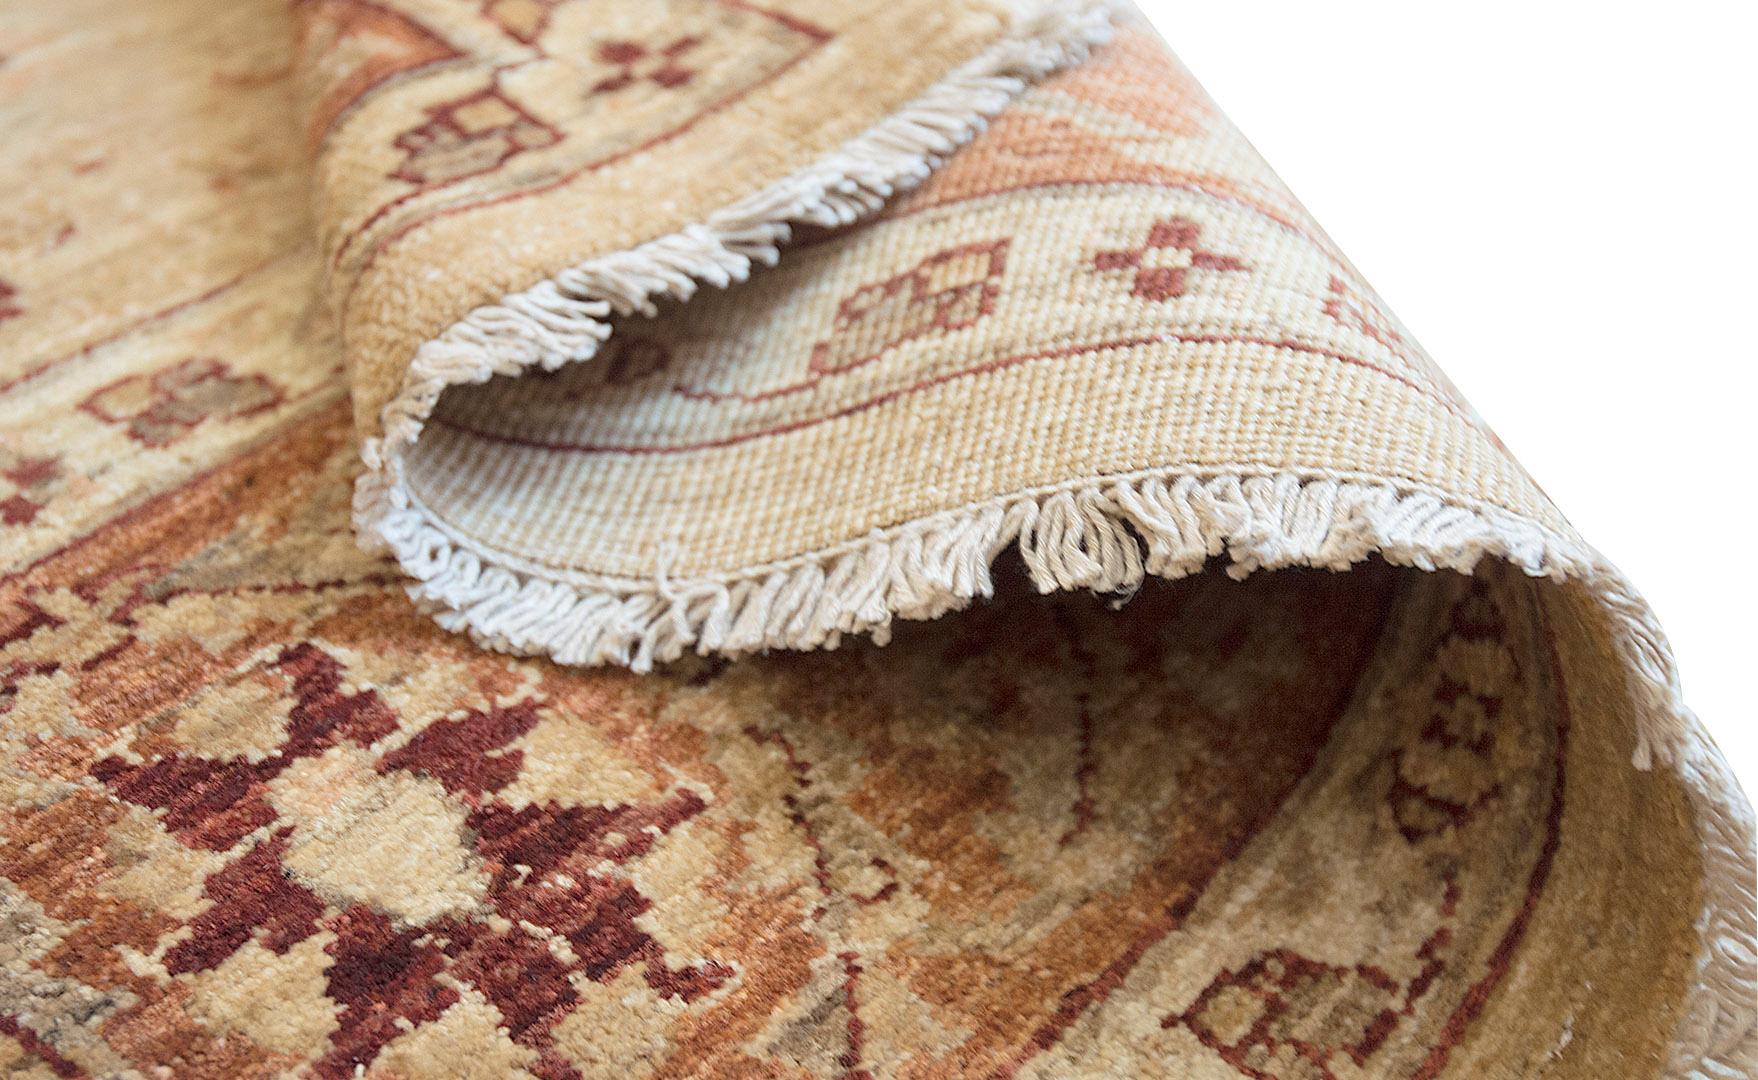 Quality Handwoven Agra Rug In Excellent Condition For Sale In West Hollywood, CA